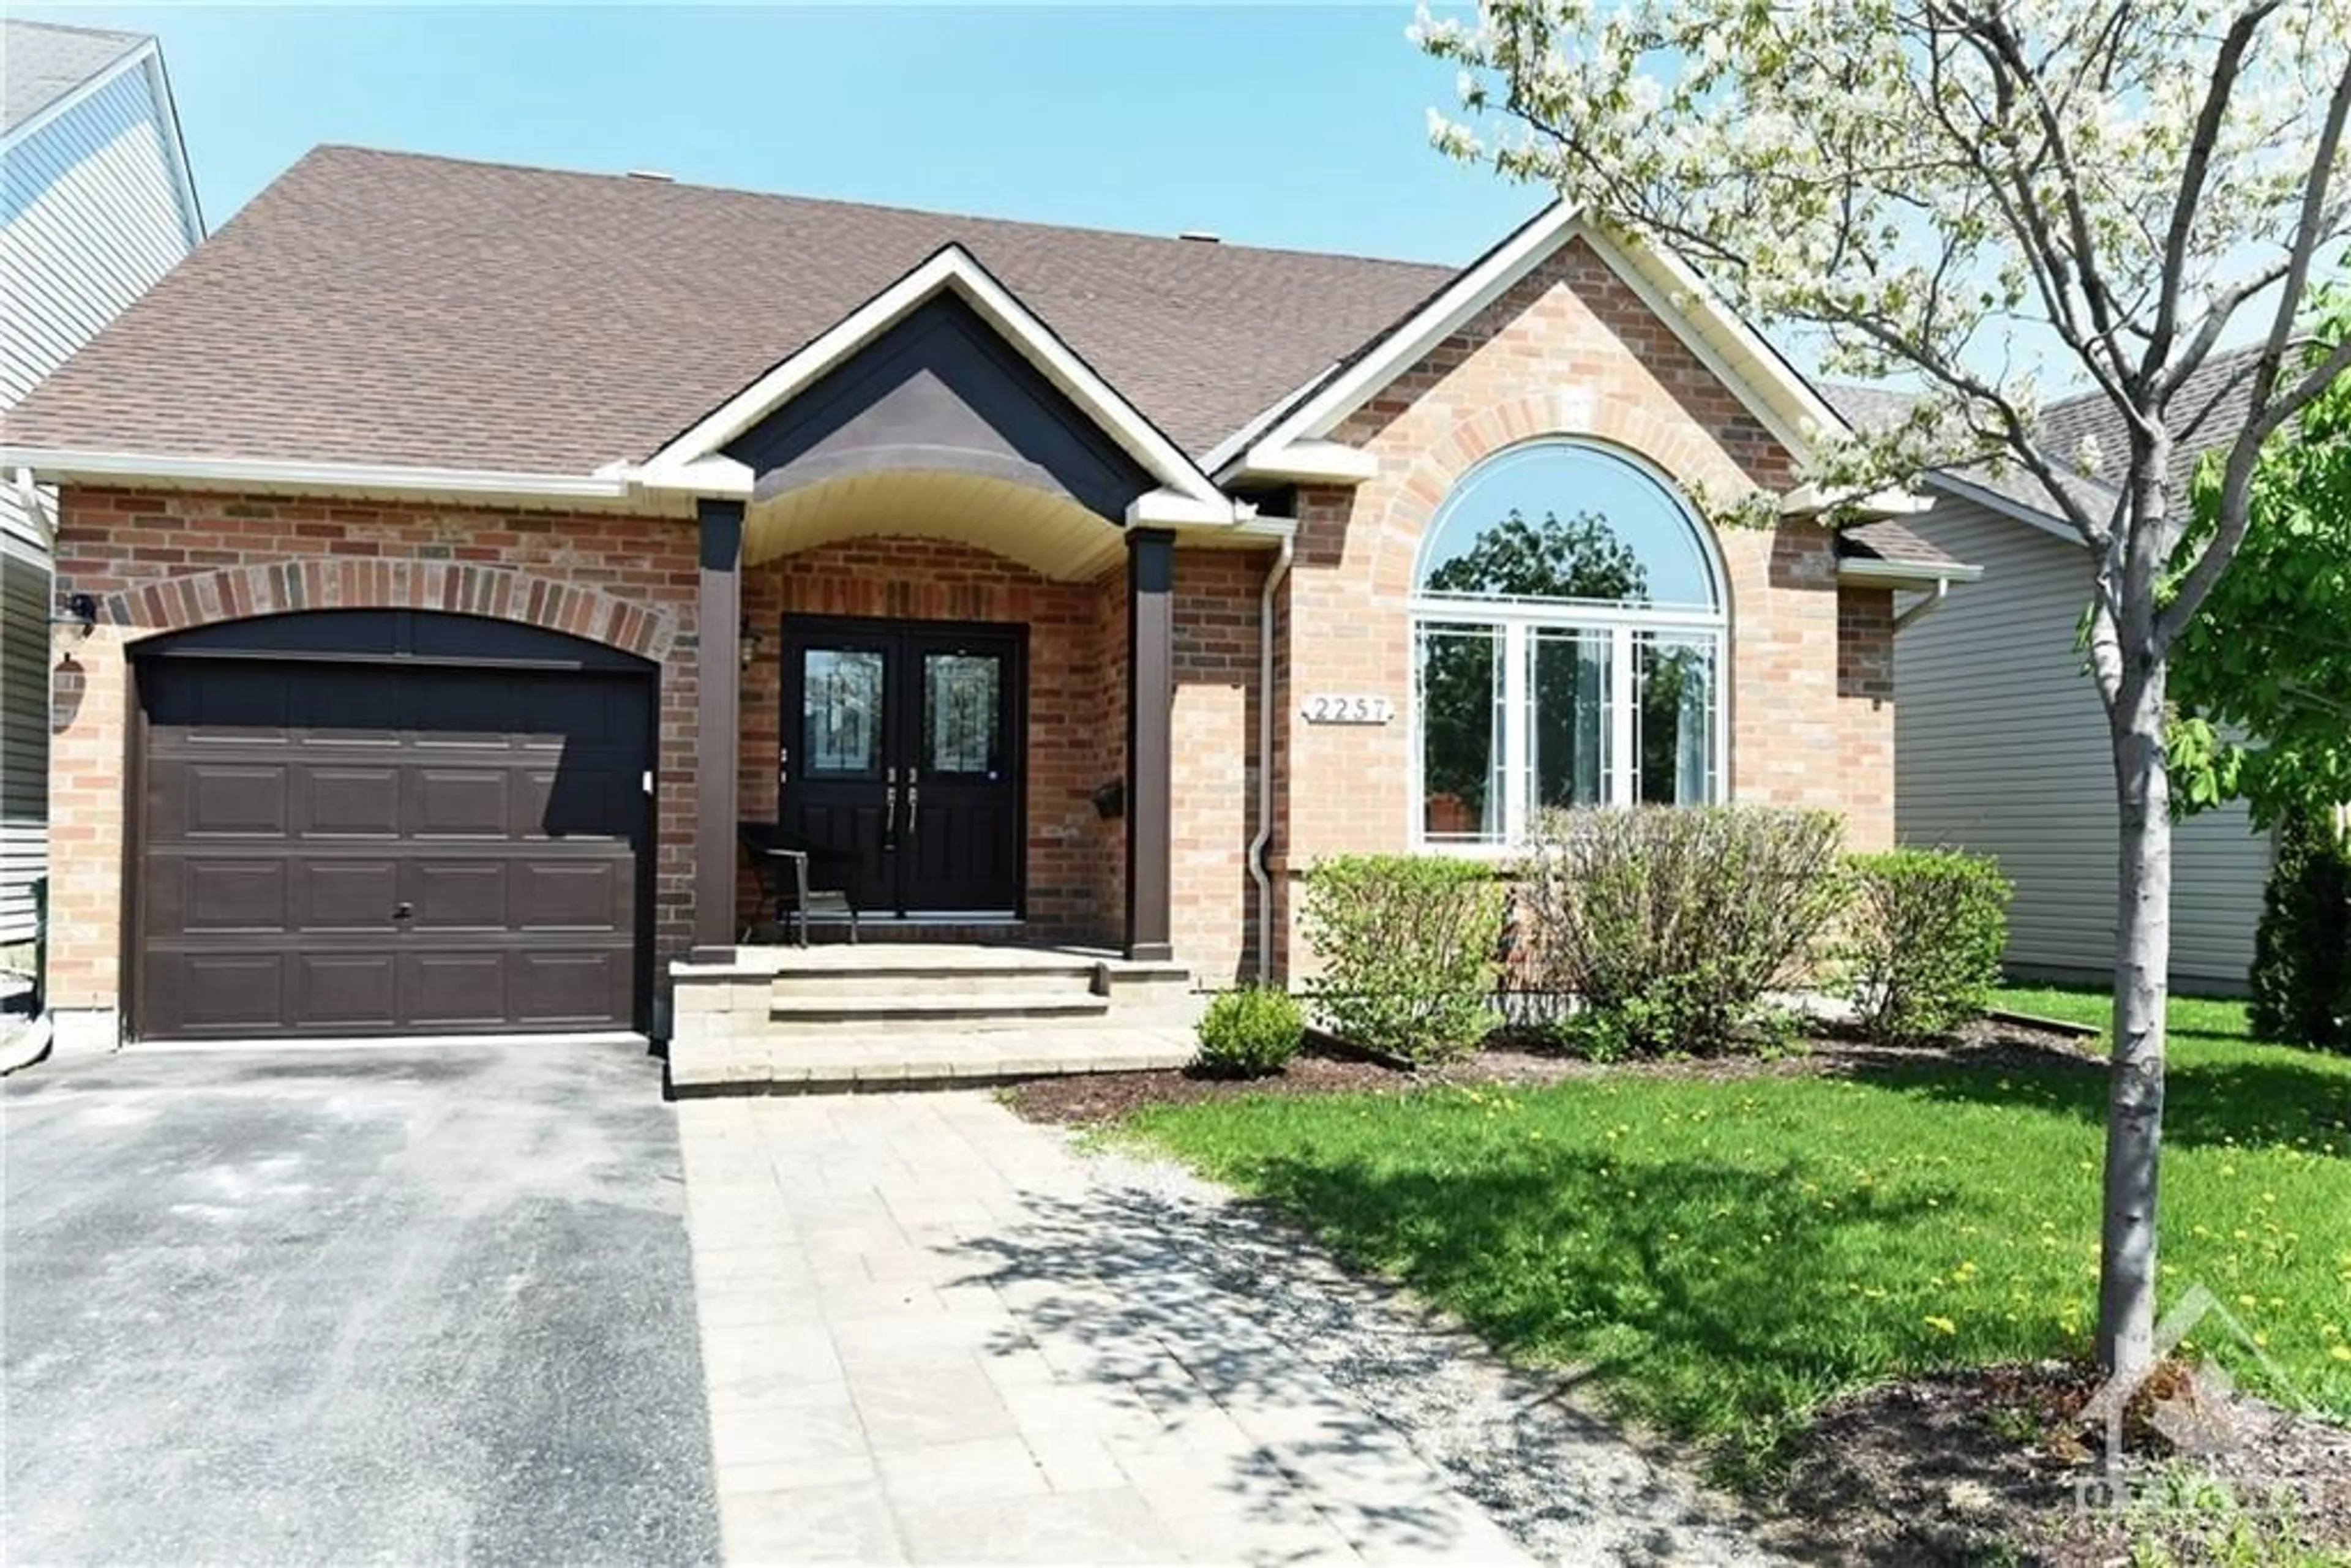 Home with brick exterior material for 2257 ESPRIT Dr, Orleans Ontario K4A 0A4